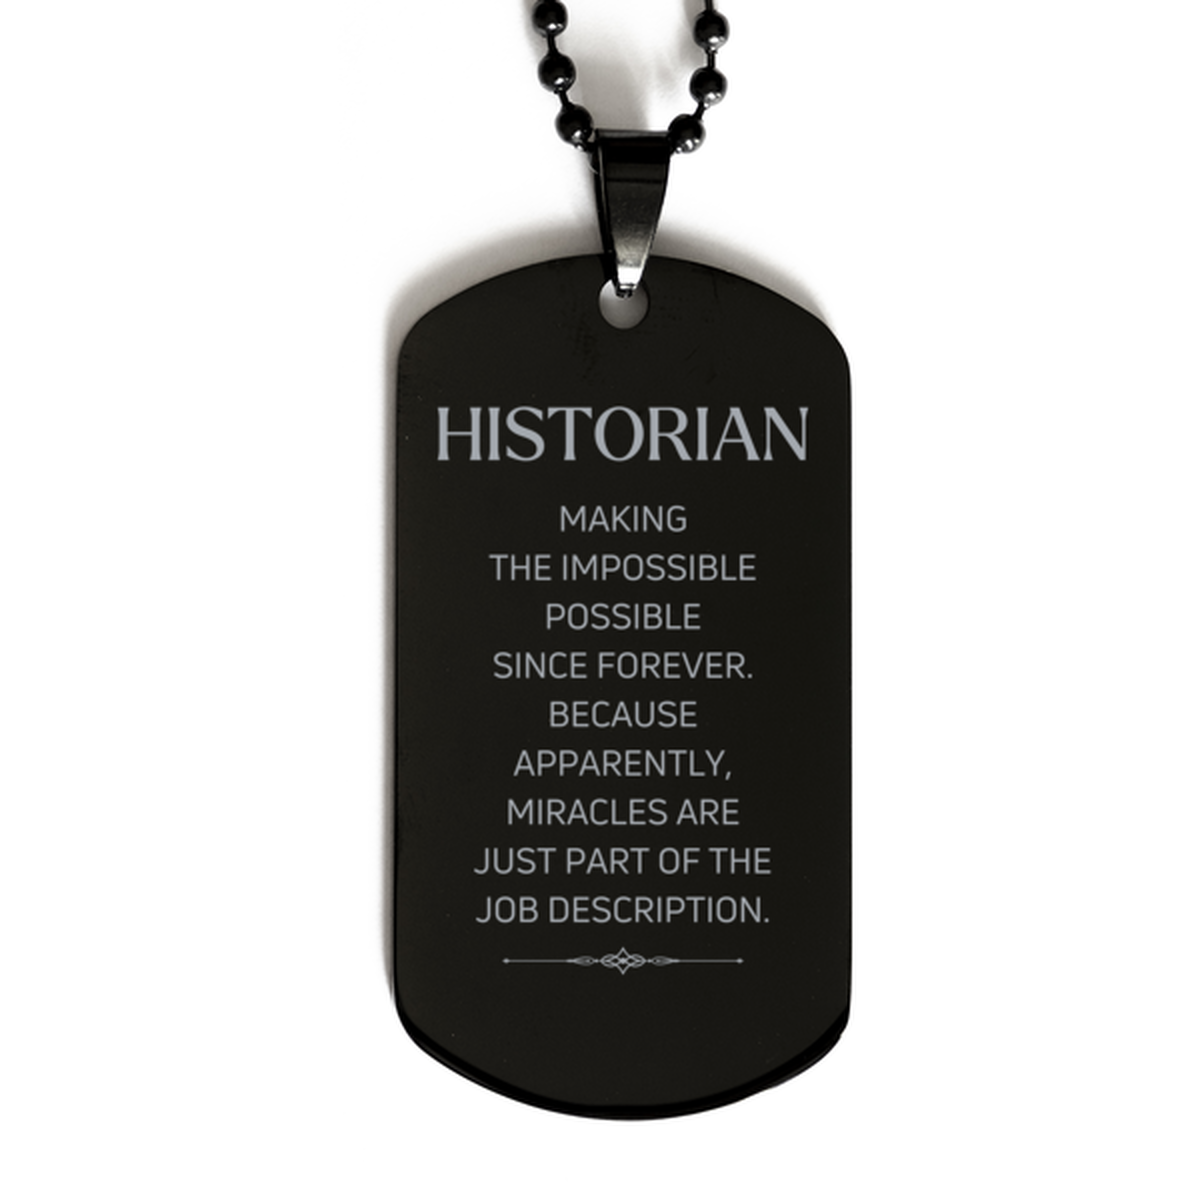 Funny Historian Gifts, Miracles are just part of the job description, Inspirational Birthday Black Dog Tag For Historian, Men, Women, Coworkers, Friends, Boss